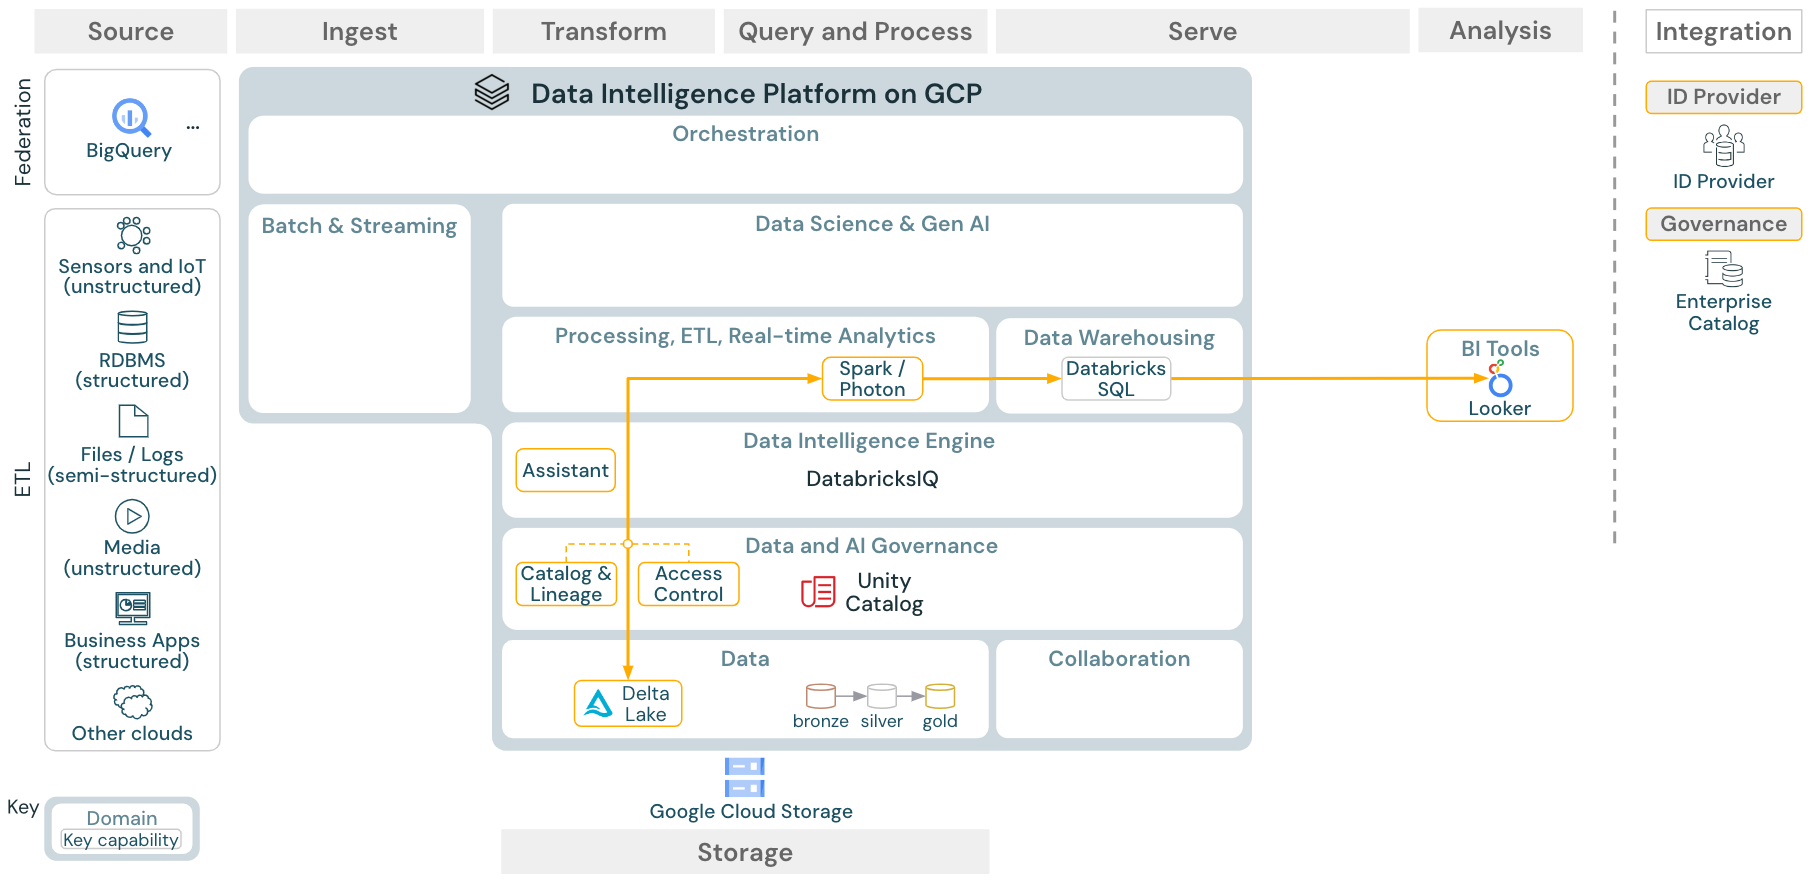 BI and SQL analytics reference architecture for Databricks on Google Cloud